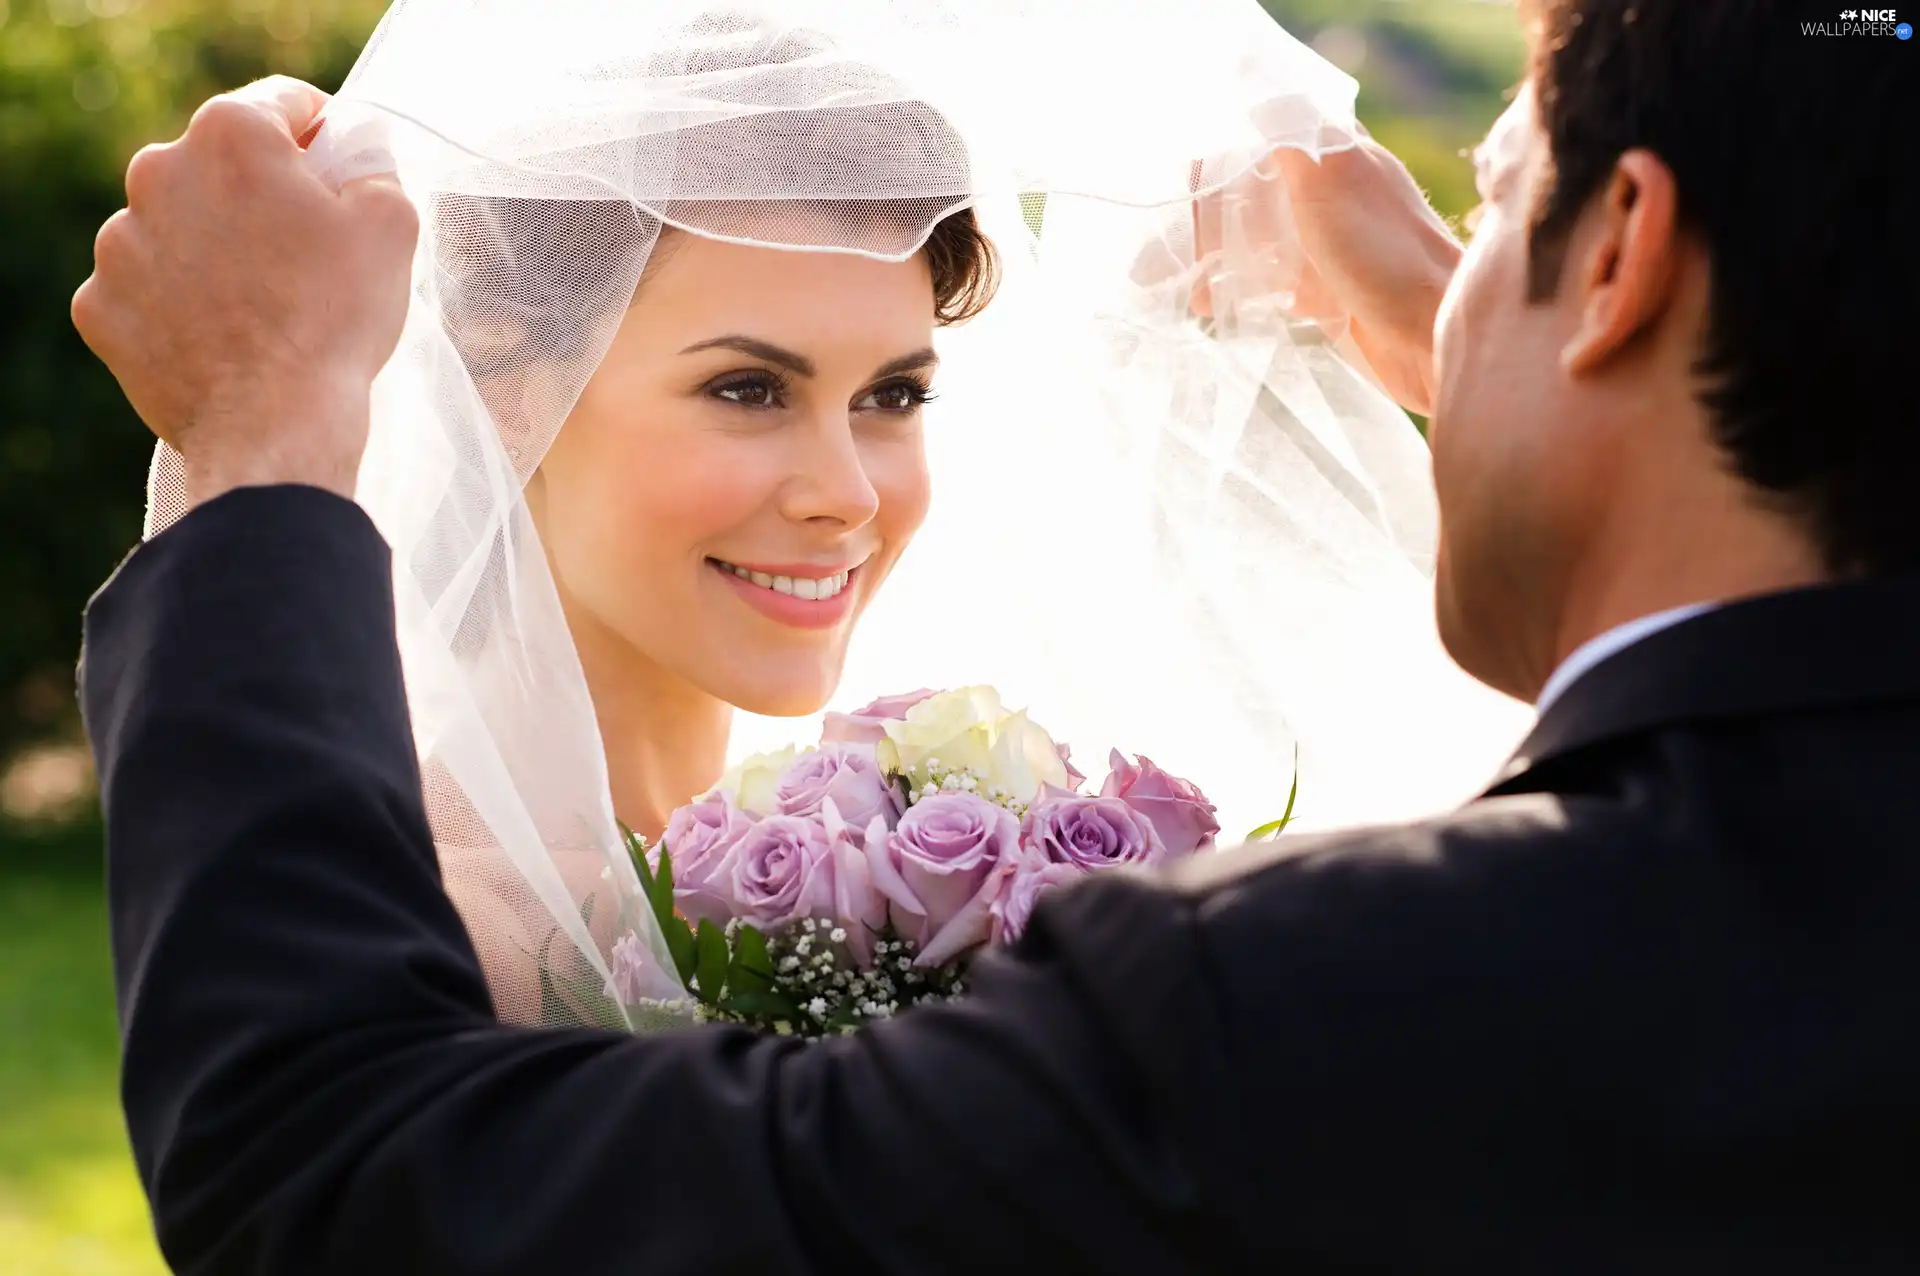 veiling, bouquet, veil, marriage, young lady